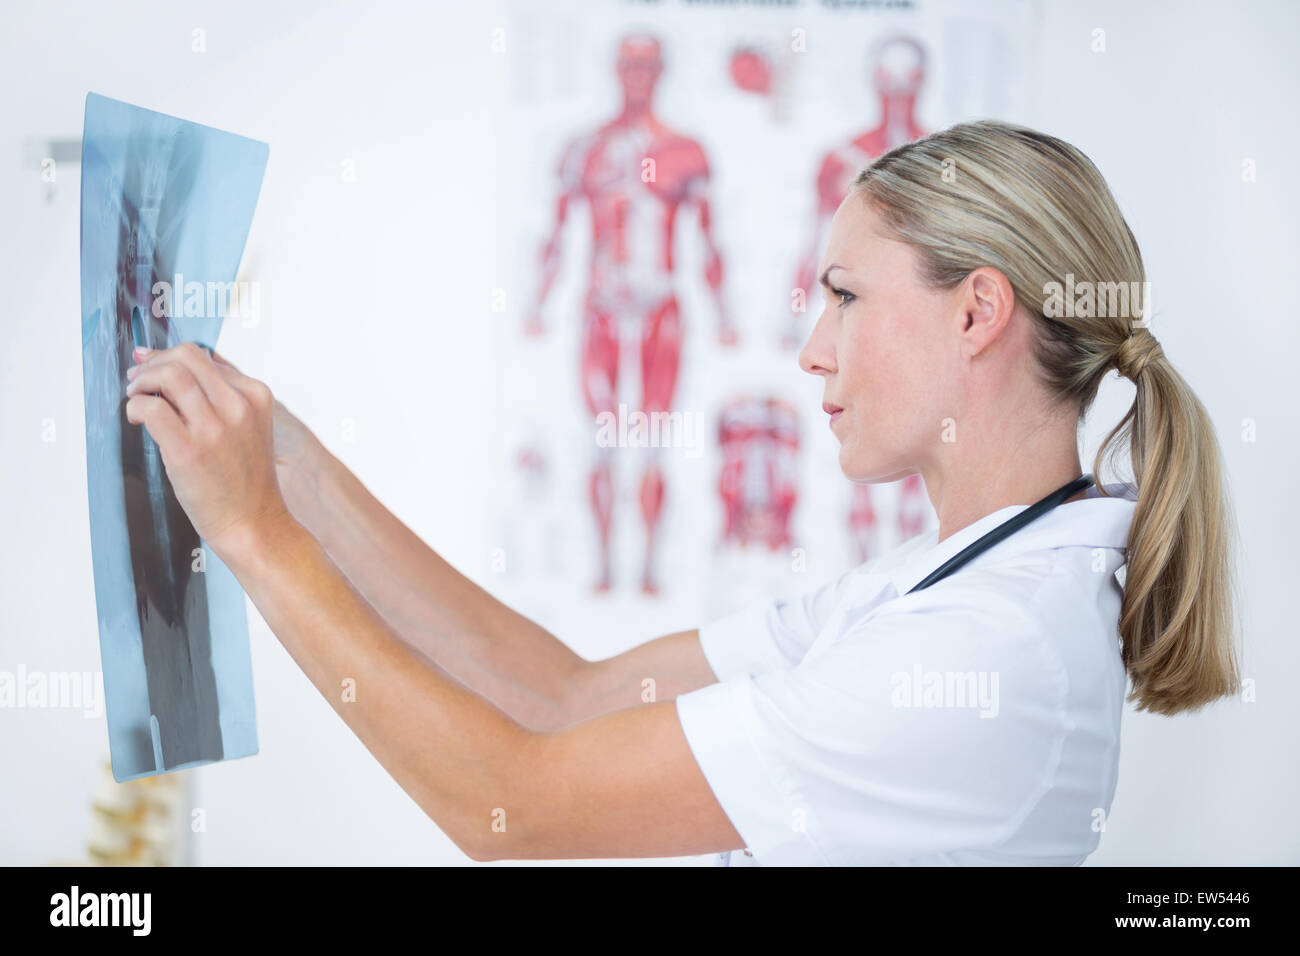 Concentrate doctor looking at X-Rays Stock Photo